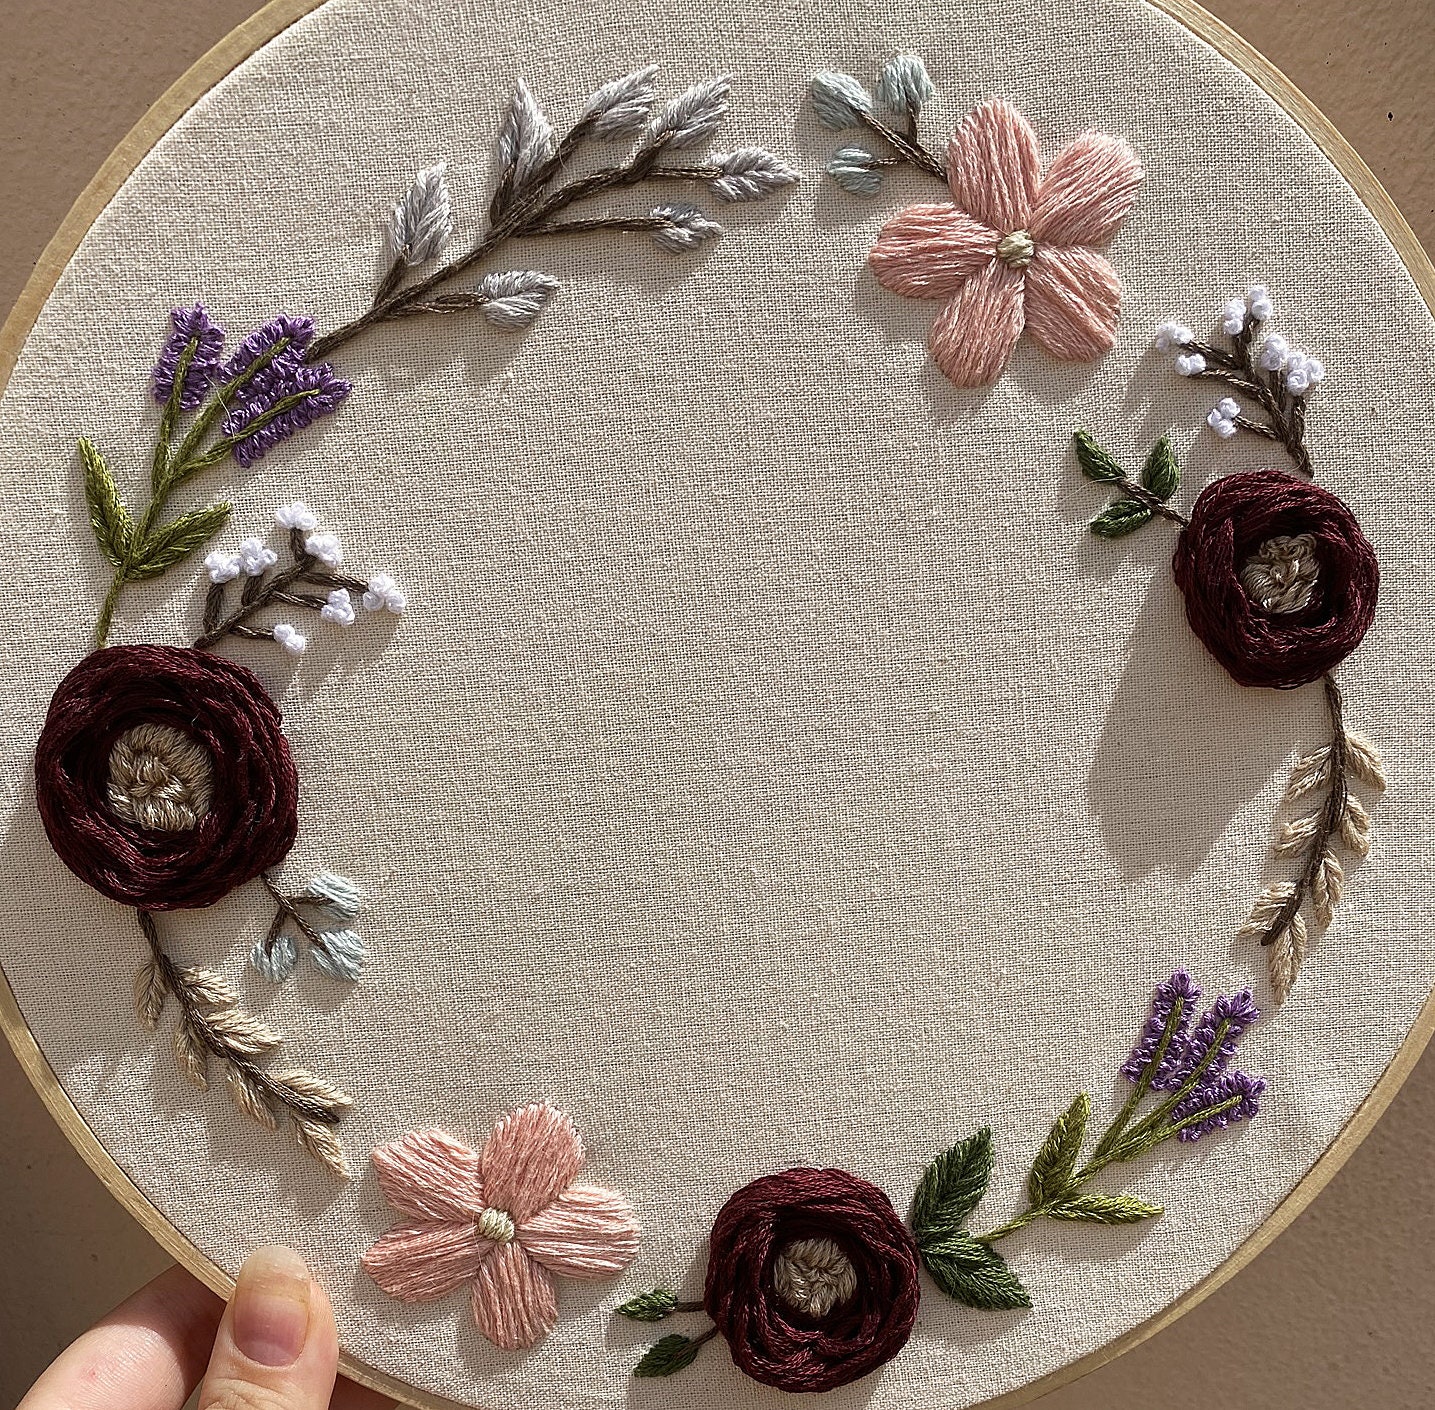 Floral Wreath Embroidery Pattern, Hoop Art Flowers, Embroidery Gift Idea,  PDF Design, Modern Home Decor DIY, Embr…